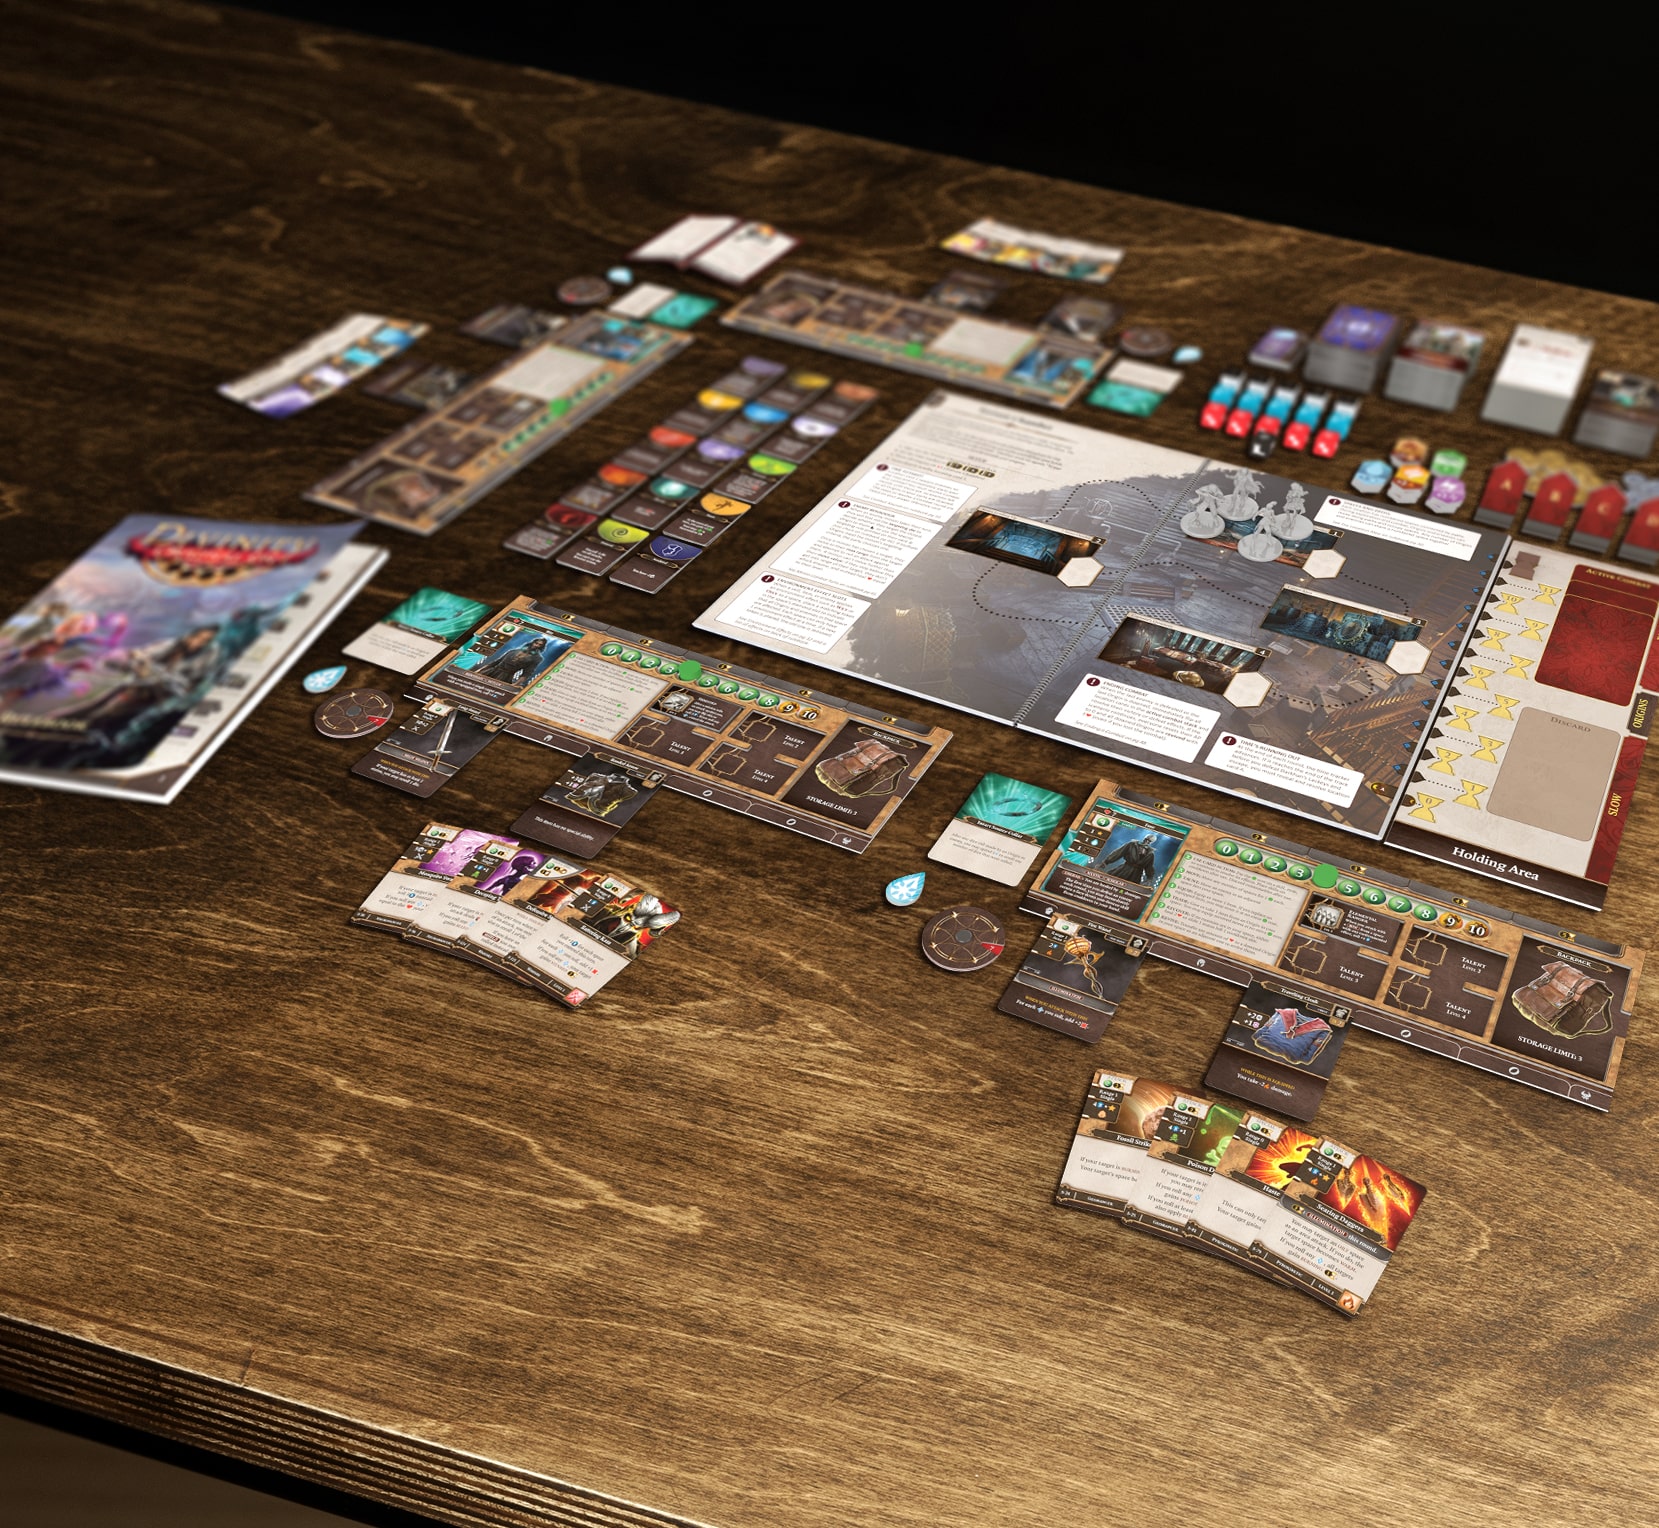 The components of the Divinity: Original Sin board game laid out on a table.